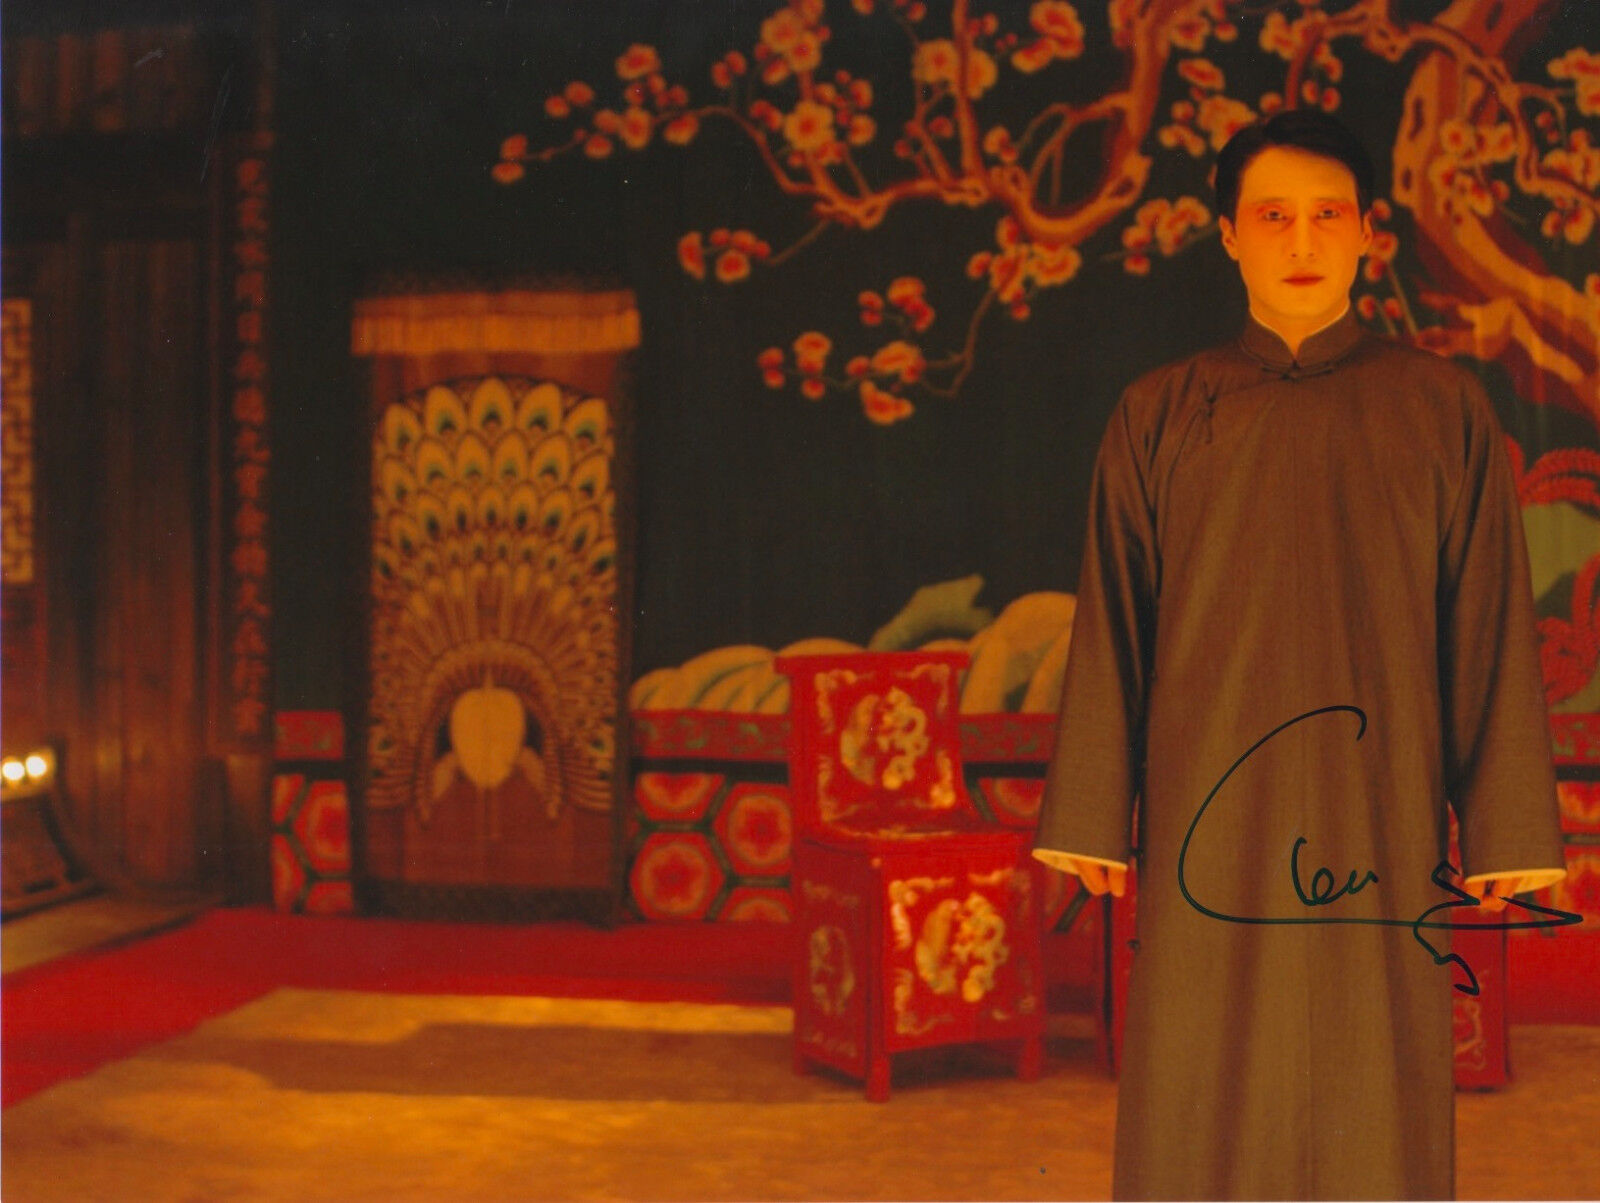 Leon Lai signed 8x12 inch Photo Poster painting autograph